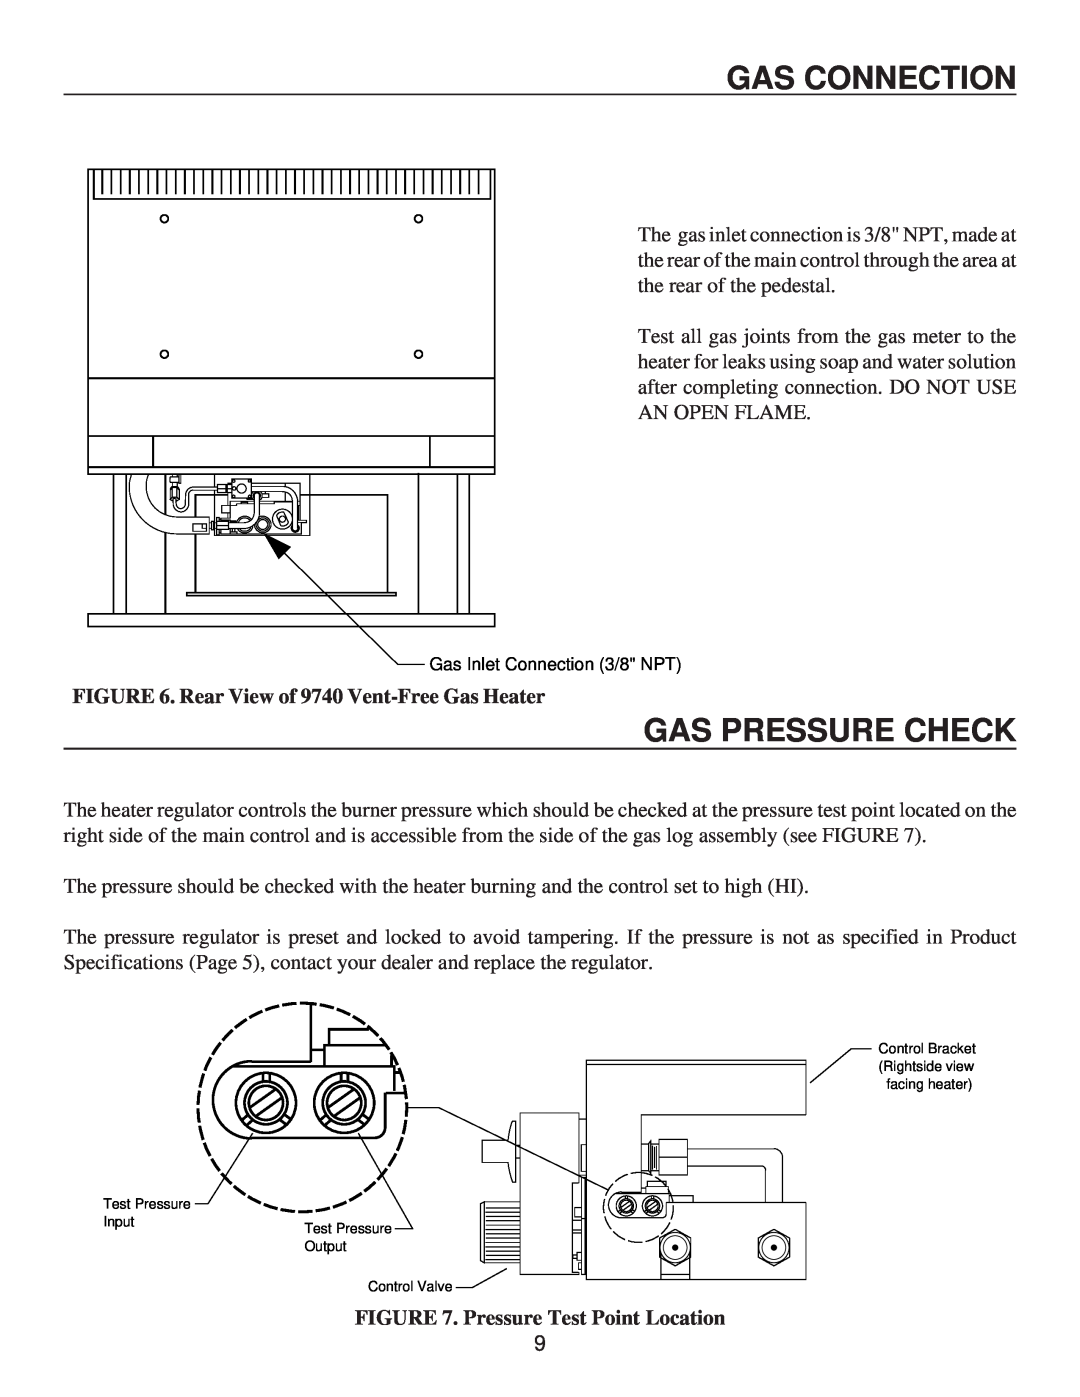 United States Stove G9740N, G9740L, C9740N, A9740N Gas Pressure Check, Gas Connection, Rear View of 9740 Vent-FreeGas Heater 